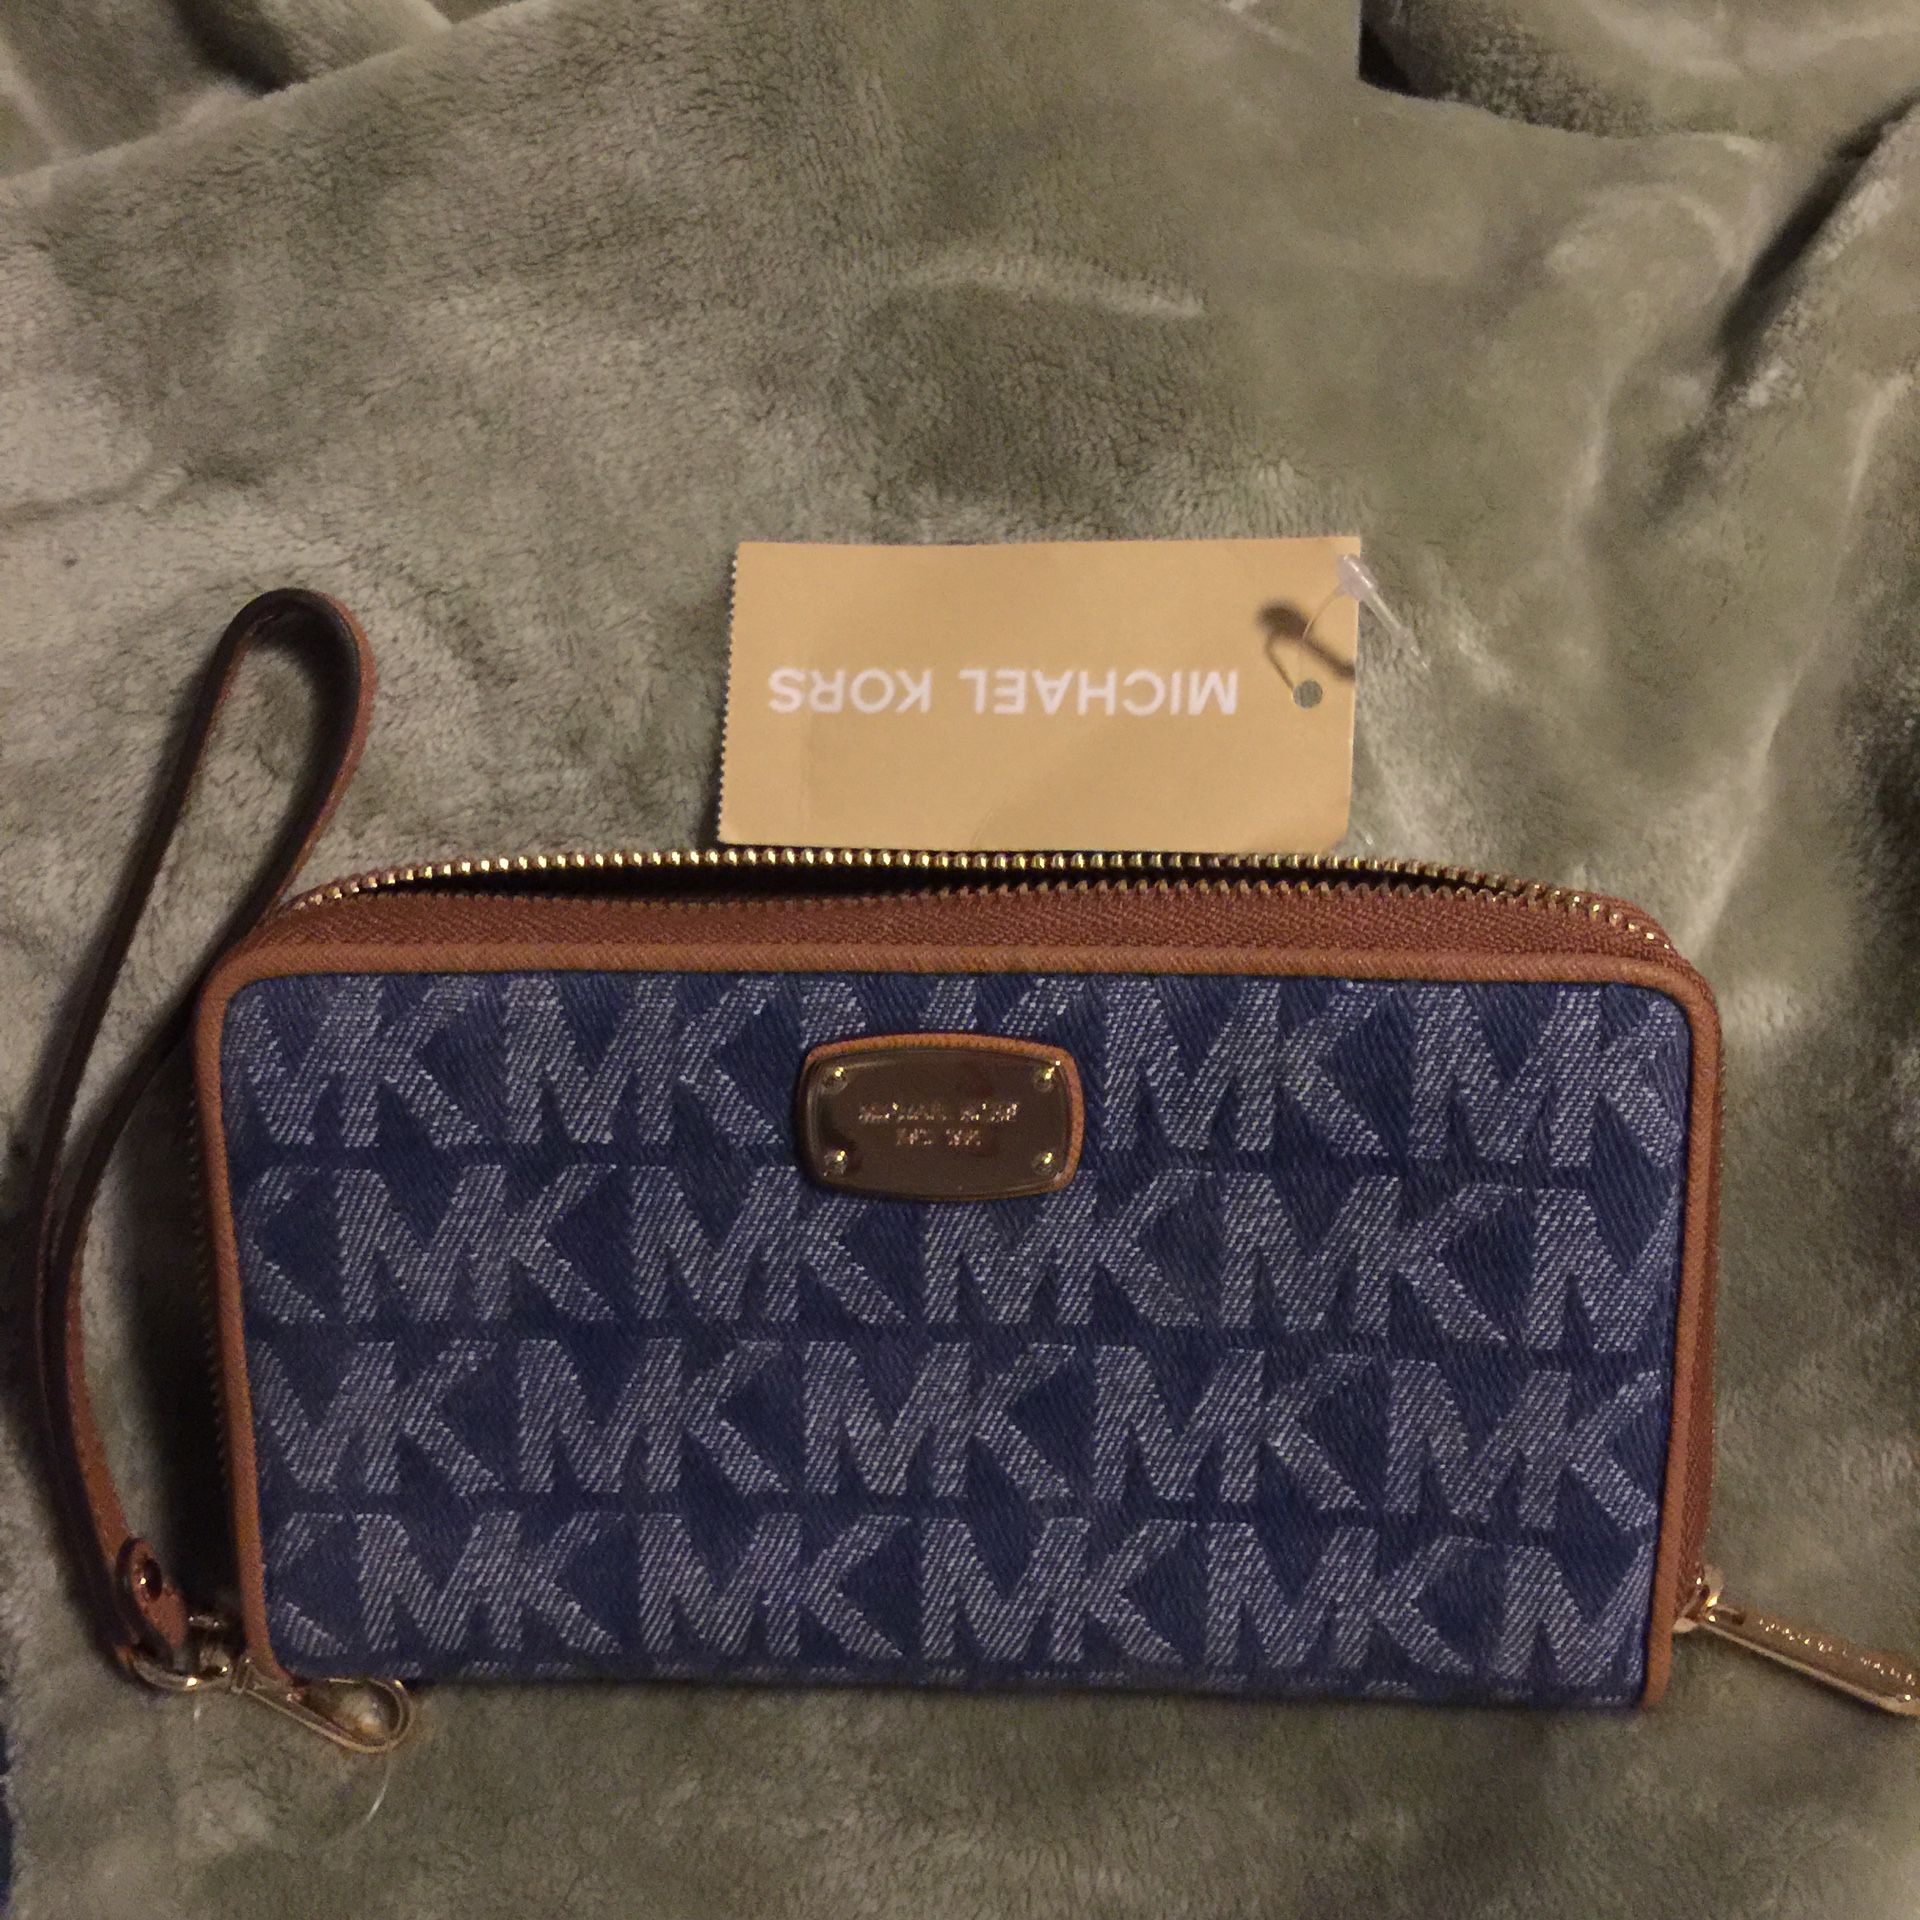 Authentic Michael Kors wallet with tag. $50 Firm Price.. Pick up in Van Nuys